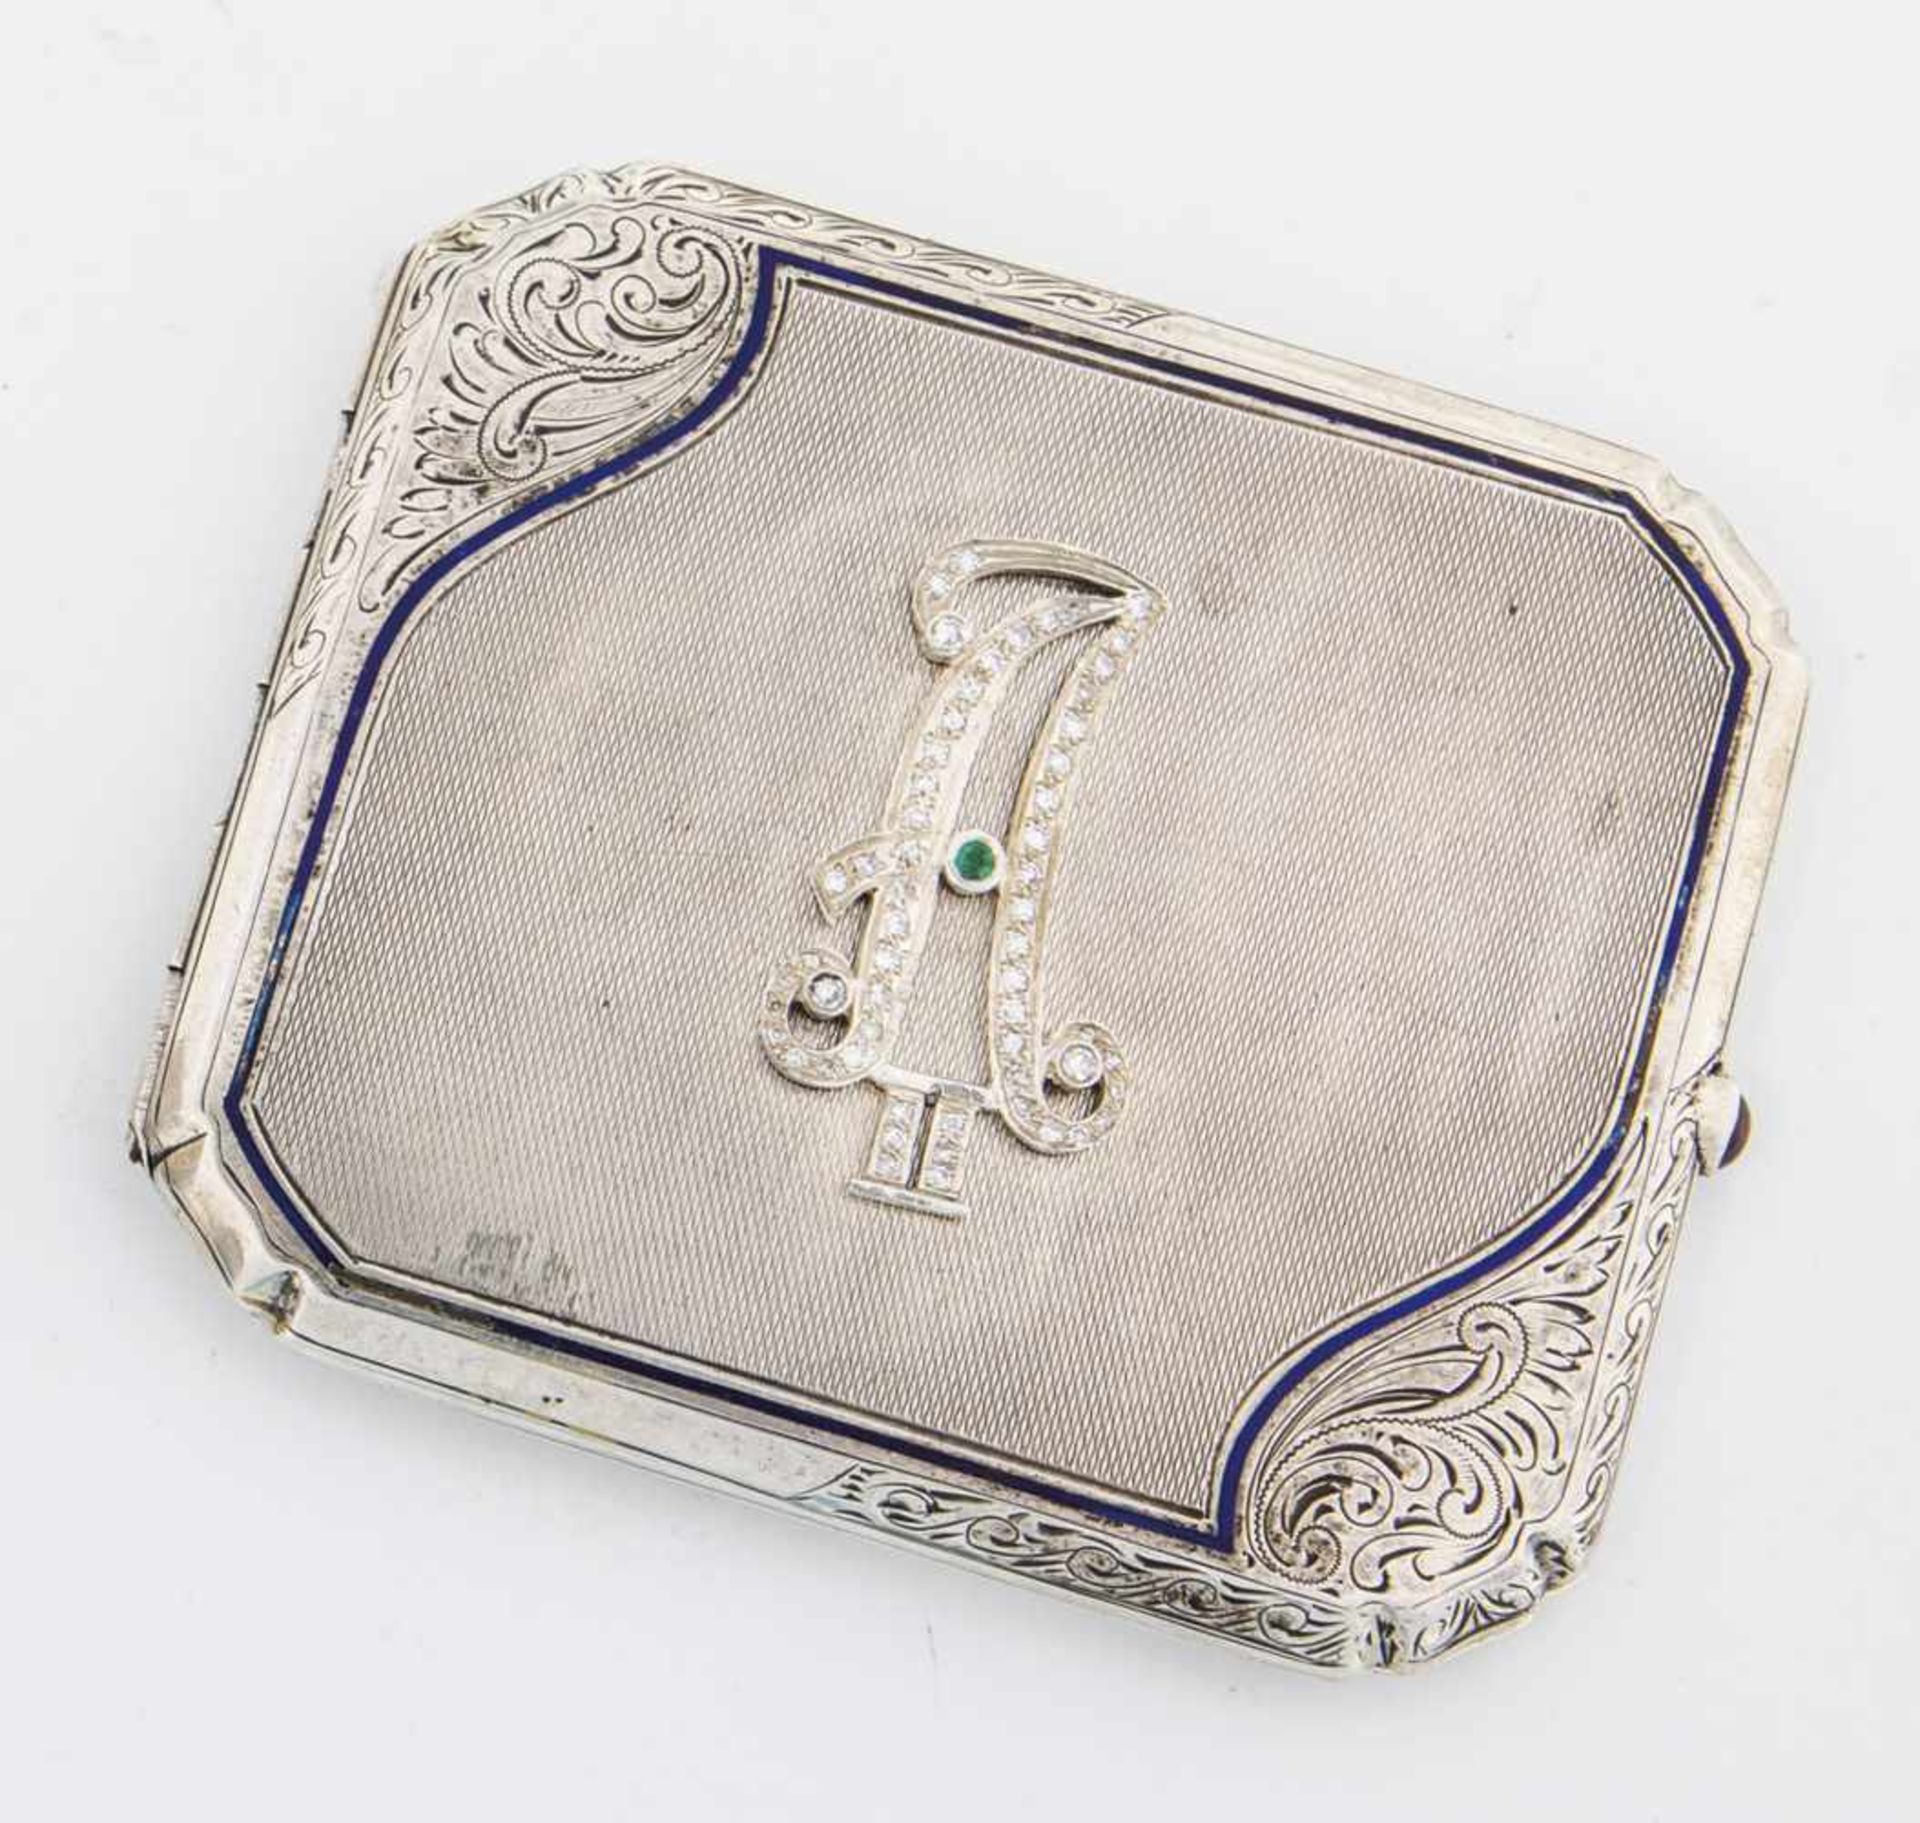 A silver cigarette case with monogramm Alexander II. 20th century. Gilt interior. Bothsides with